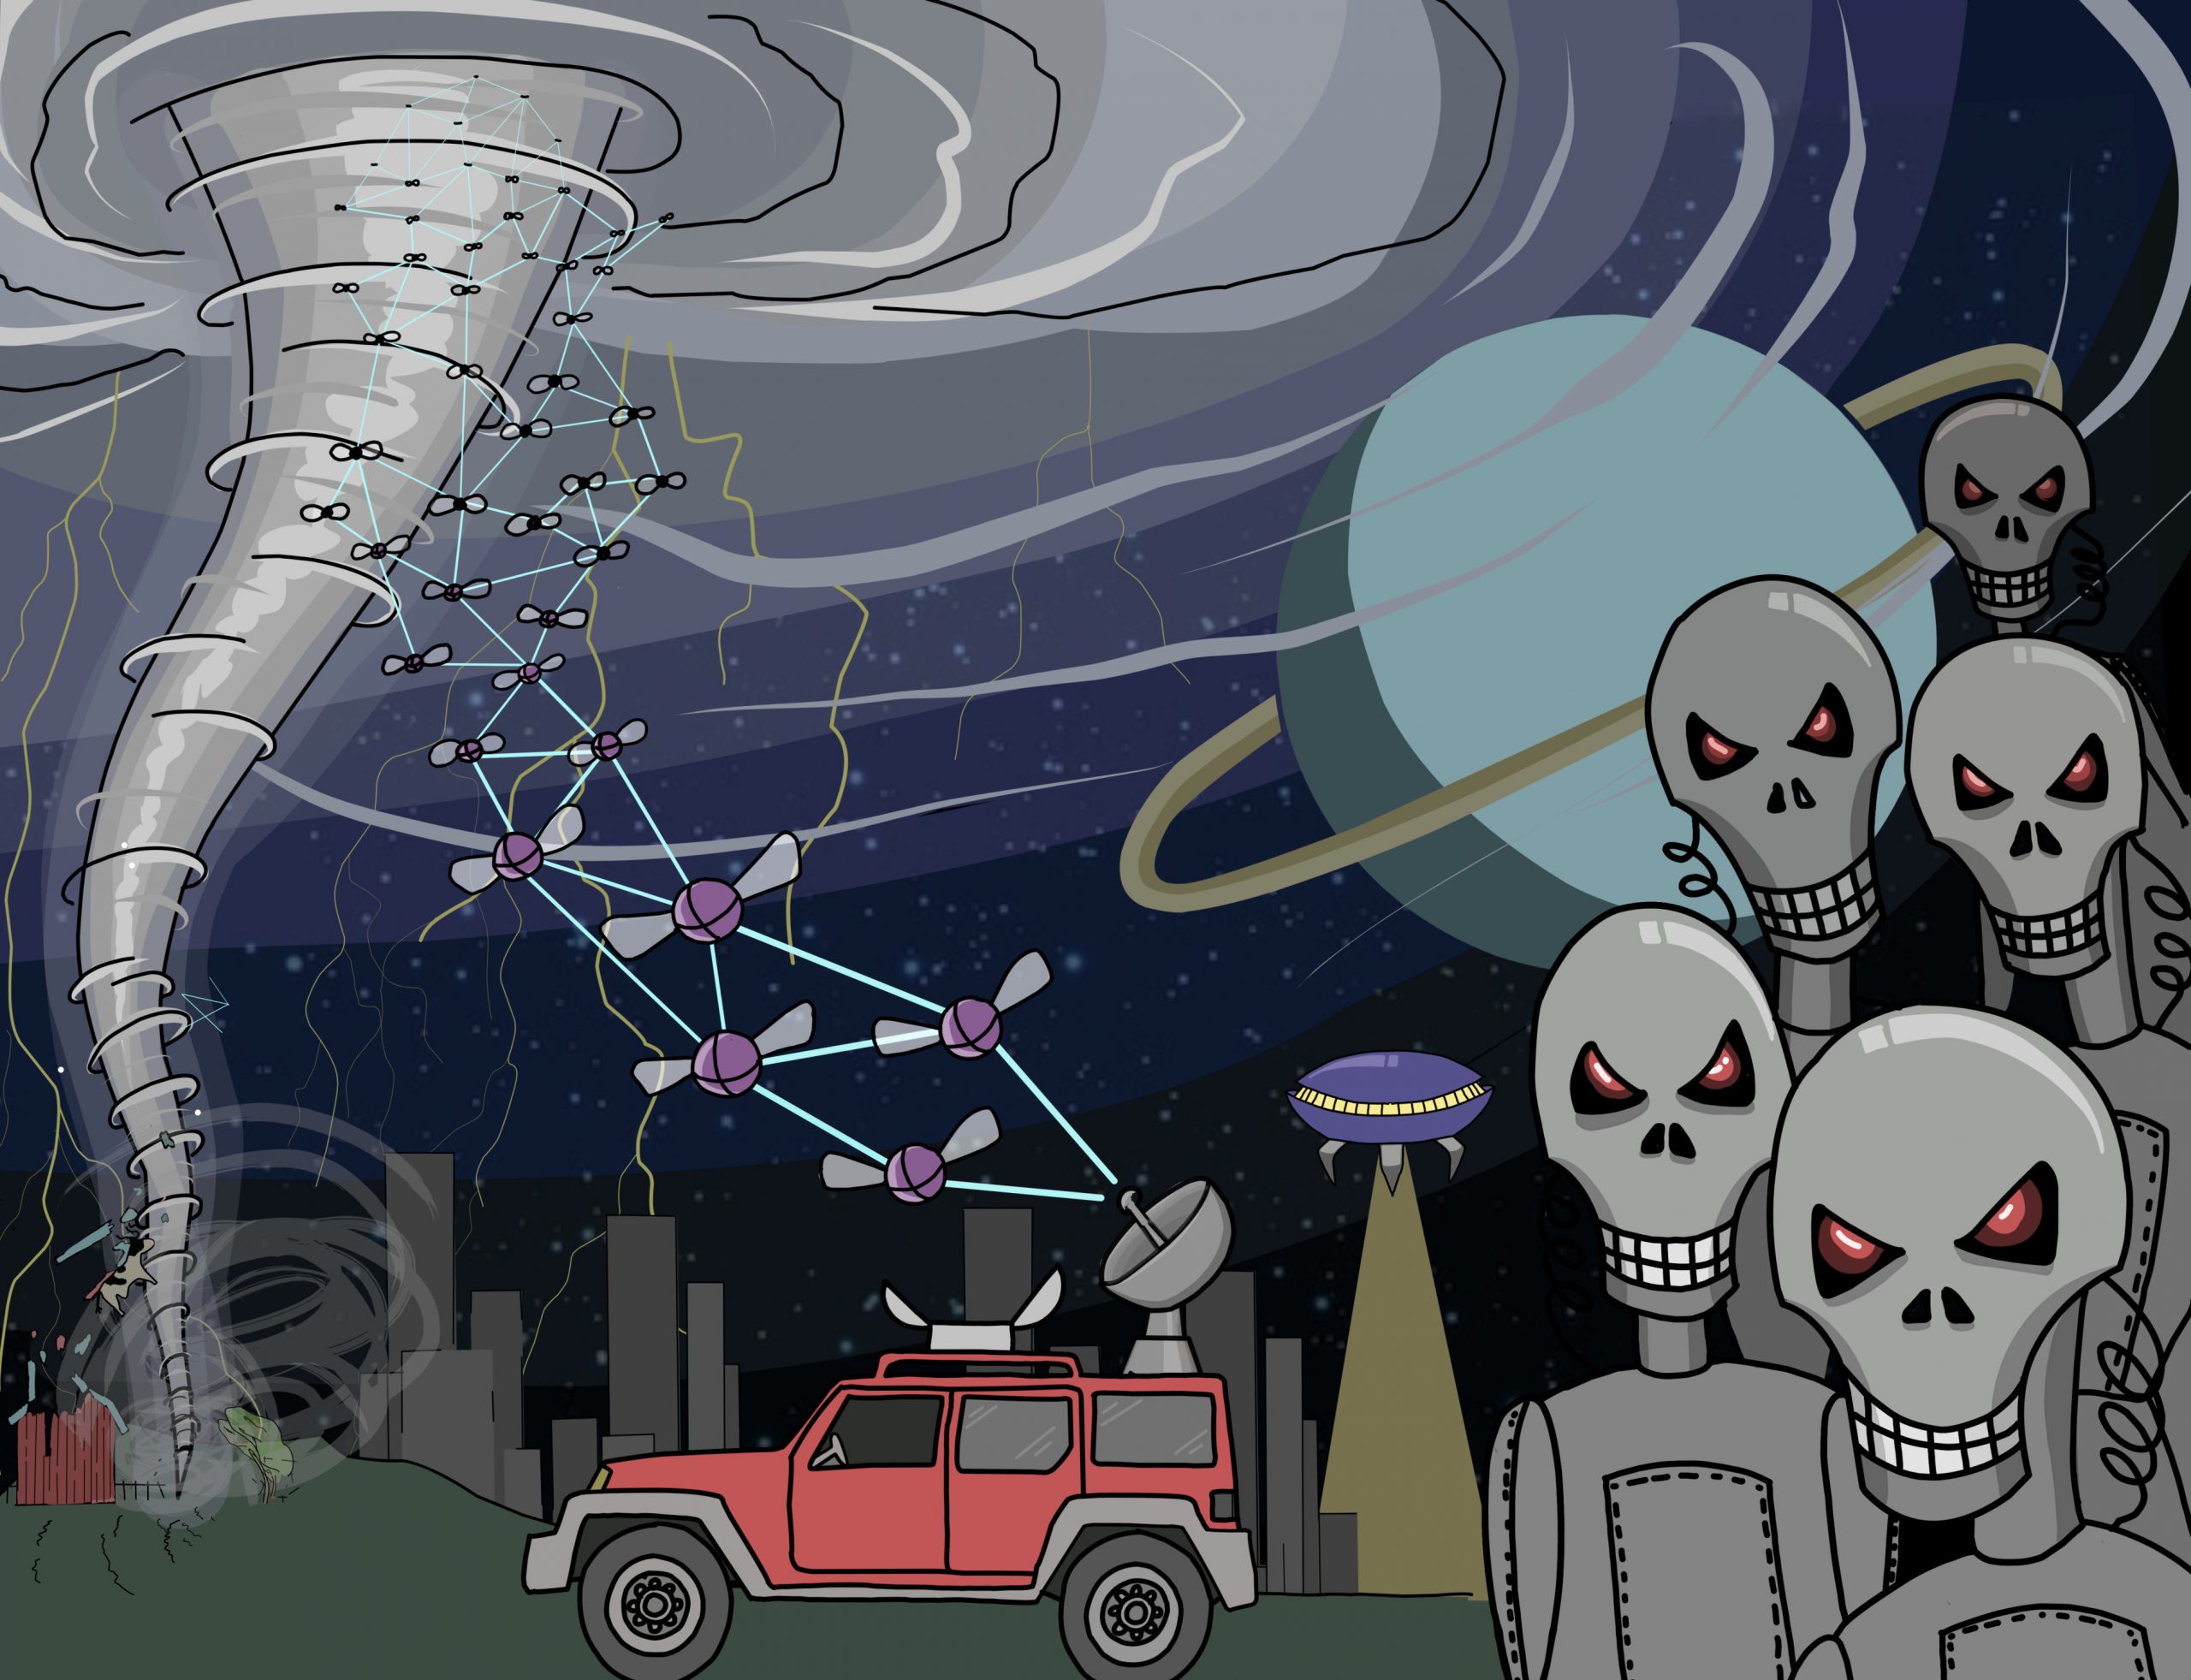 Cartoon illustration of the uses of distributed communication networks, including hurricane monitoring, and robot communication.